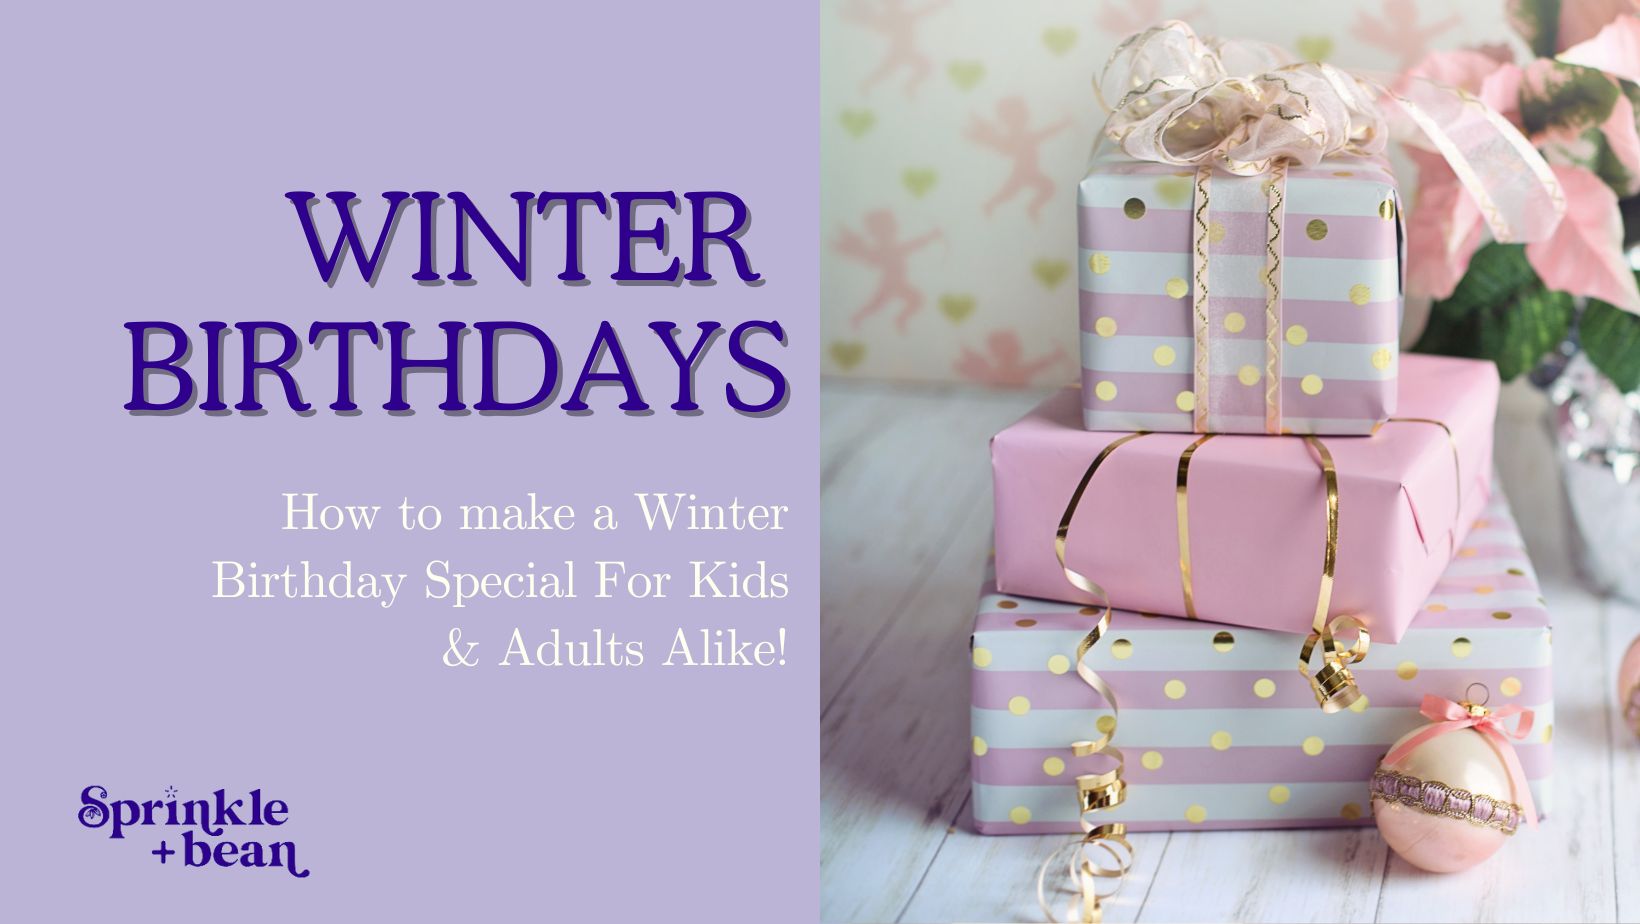 Winter Birthday Ideas for Making the Day Special